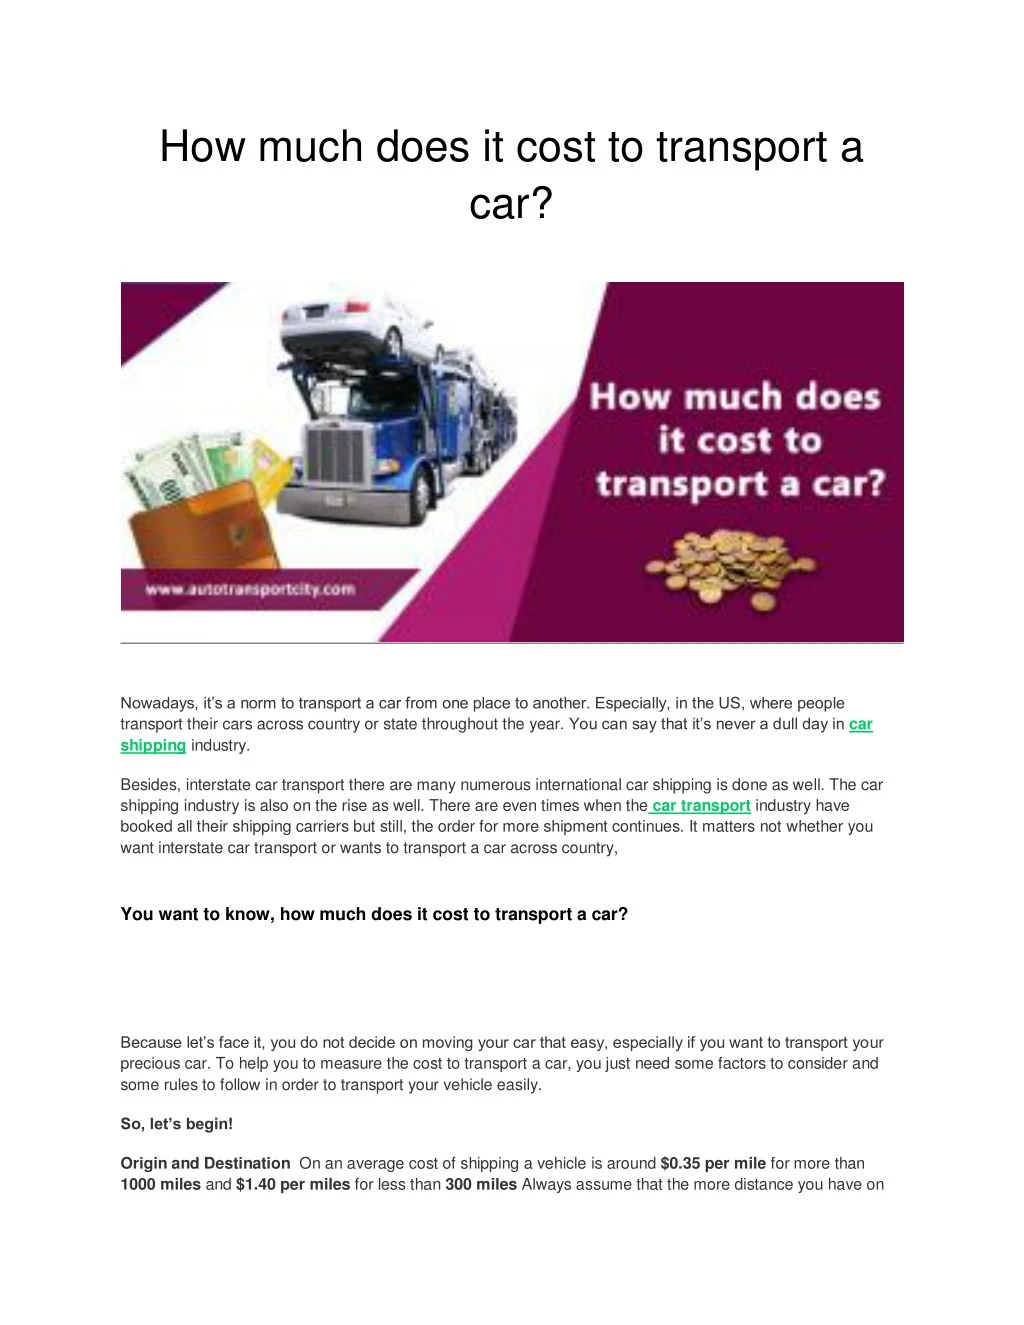 how much does it cost to transport a car